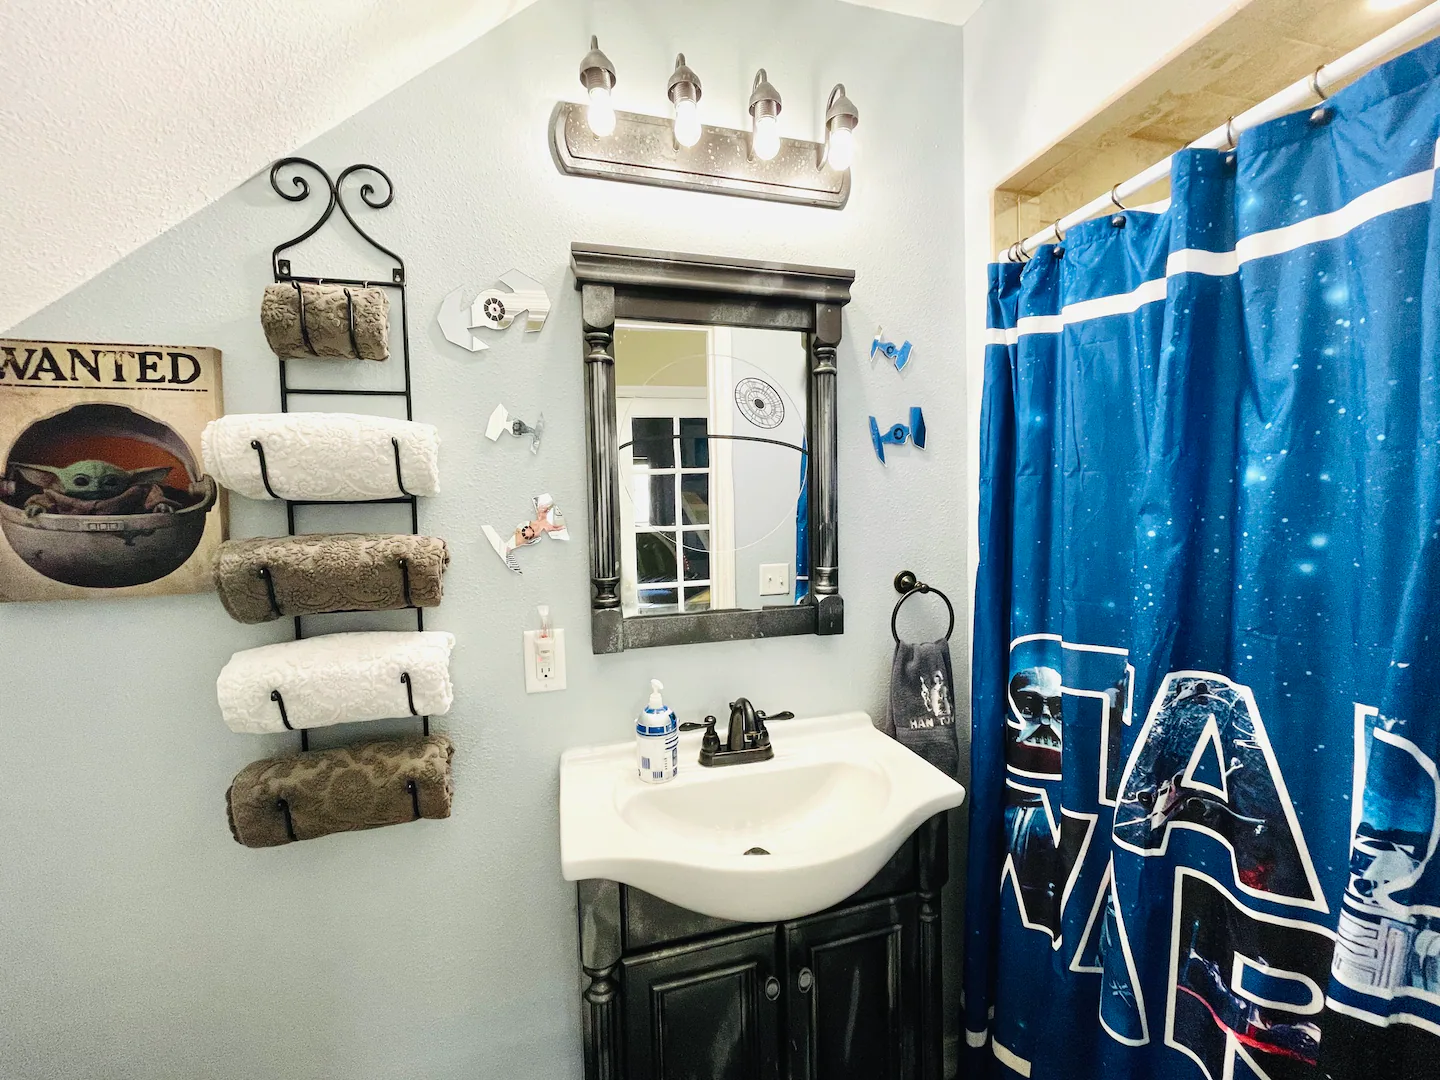 The Star Wars Bathroom is located in the hall, just across from the Star Wars bedrooms, allowing the entire Jedi and Sith family to wash themselves in the morning!